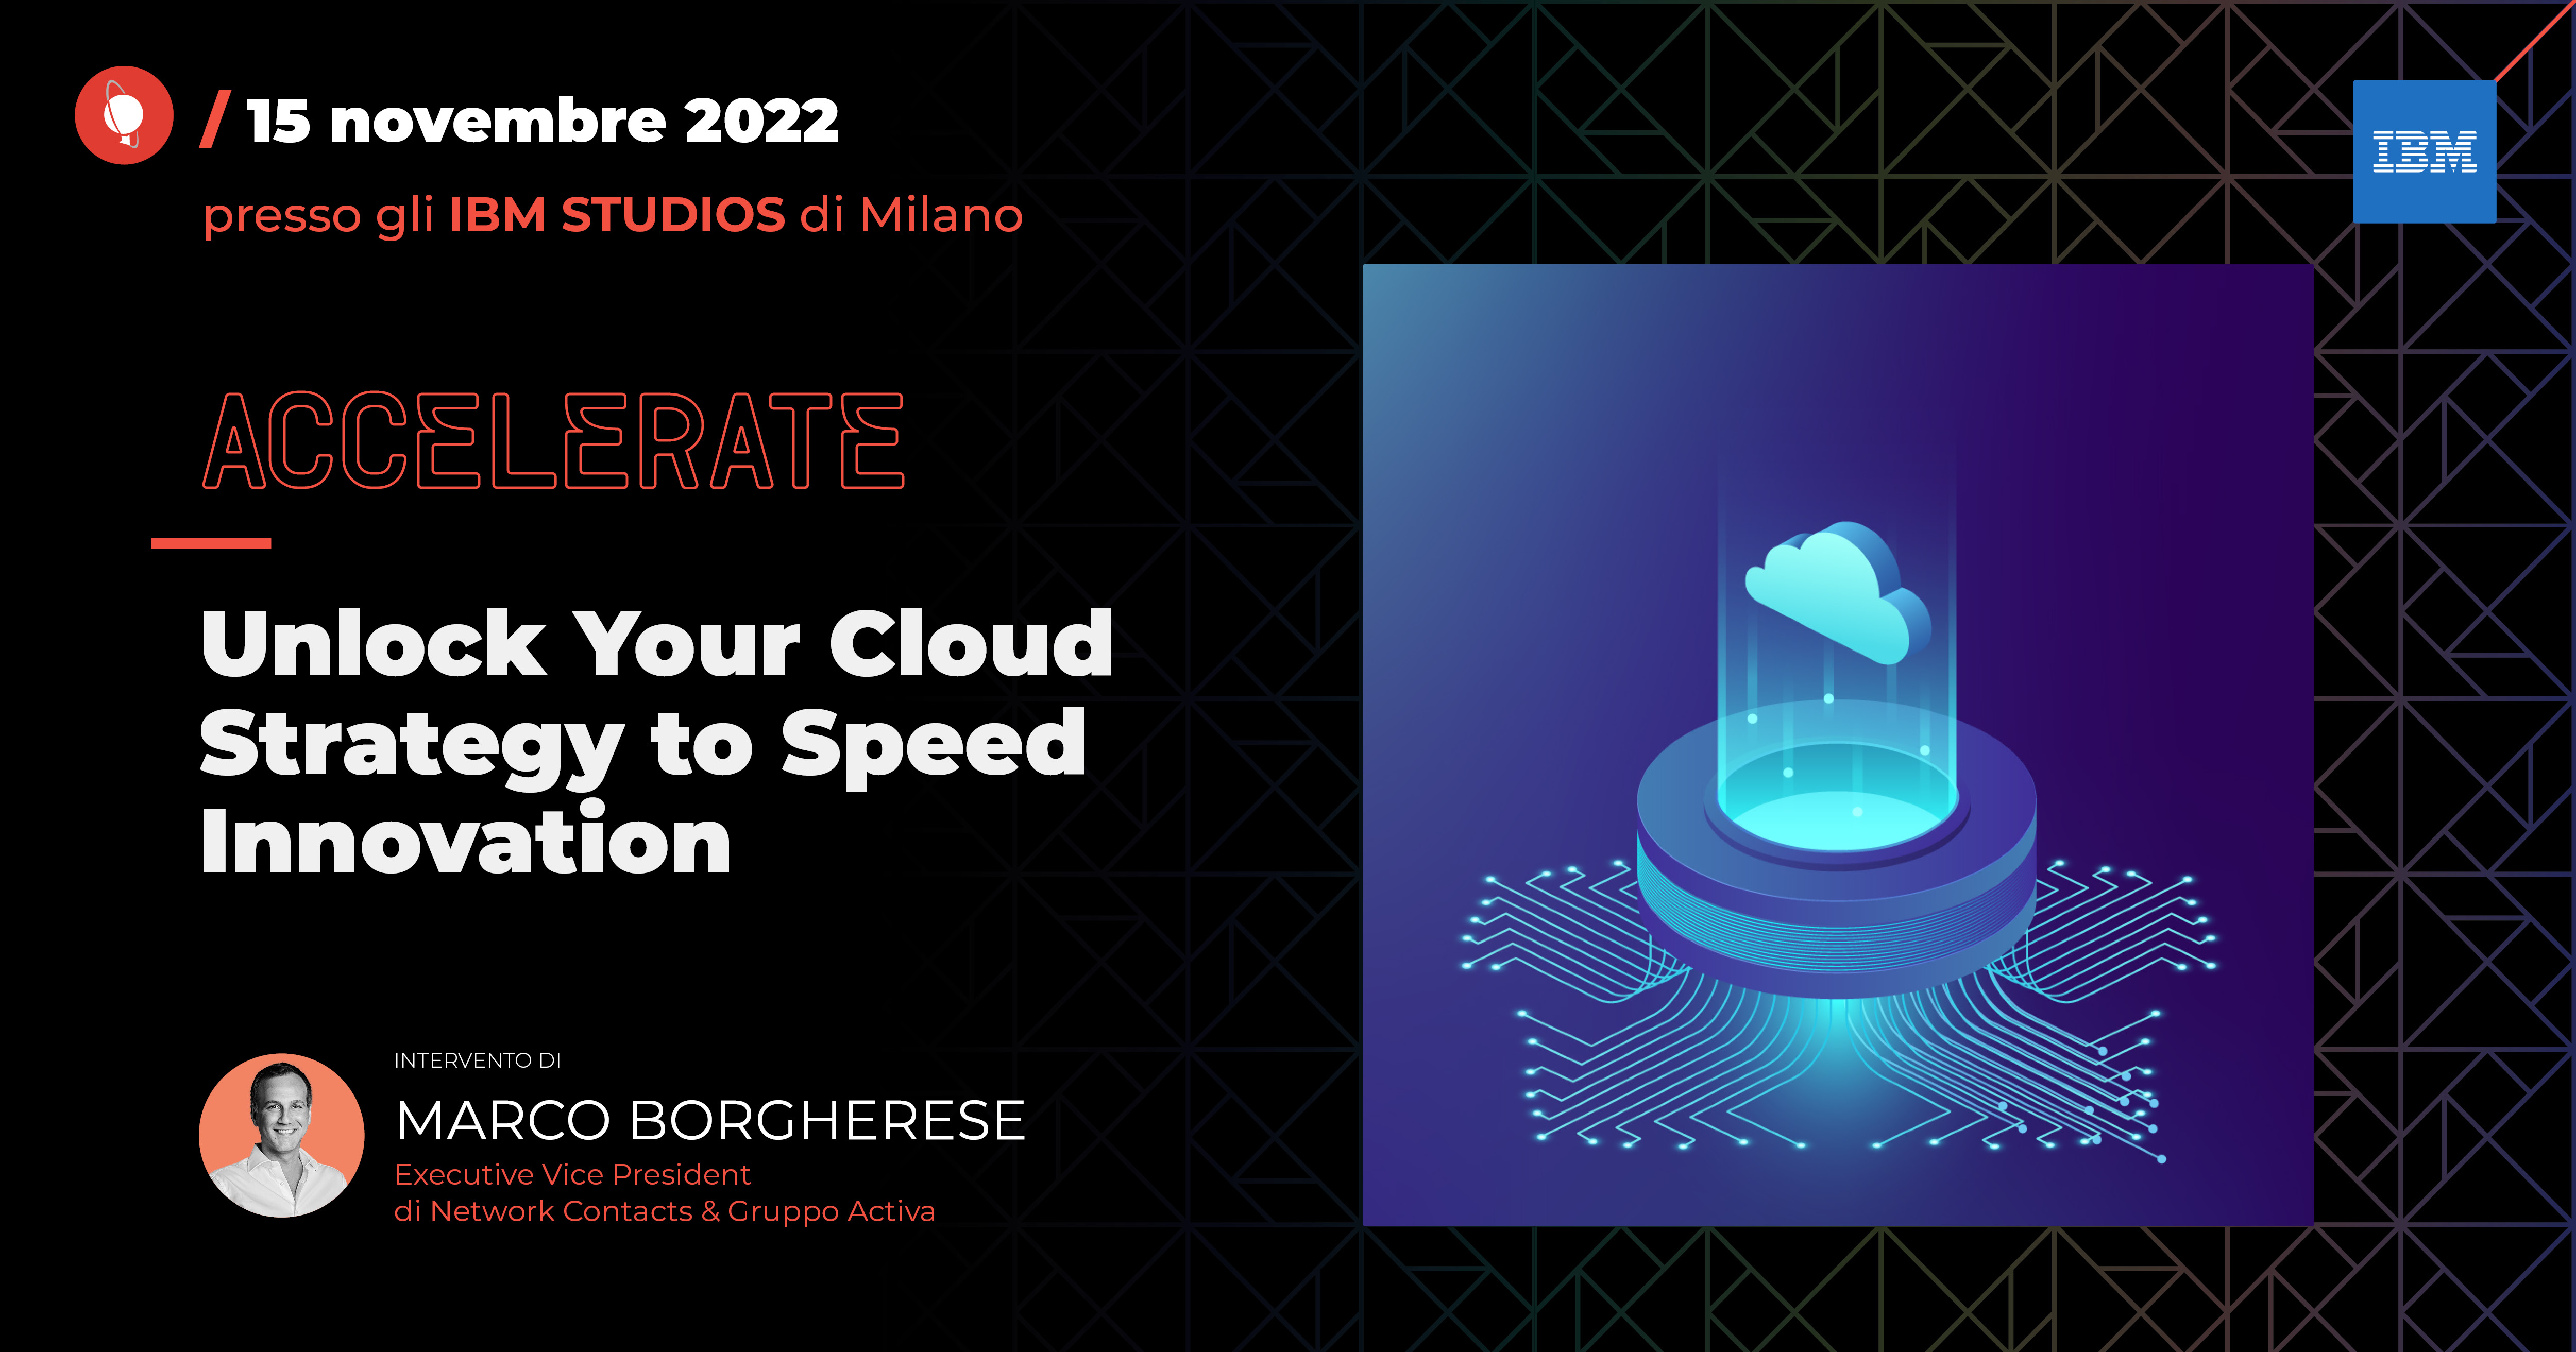 IBM event -Accelerate. Unlock your cloud strategy to speed innovation